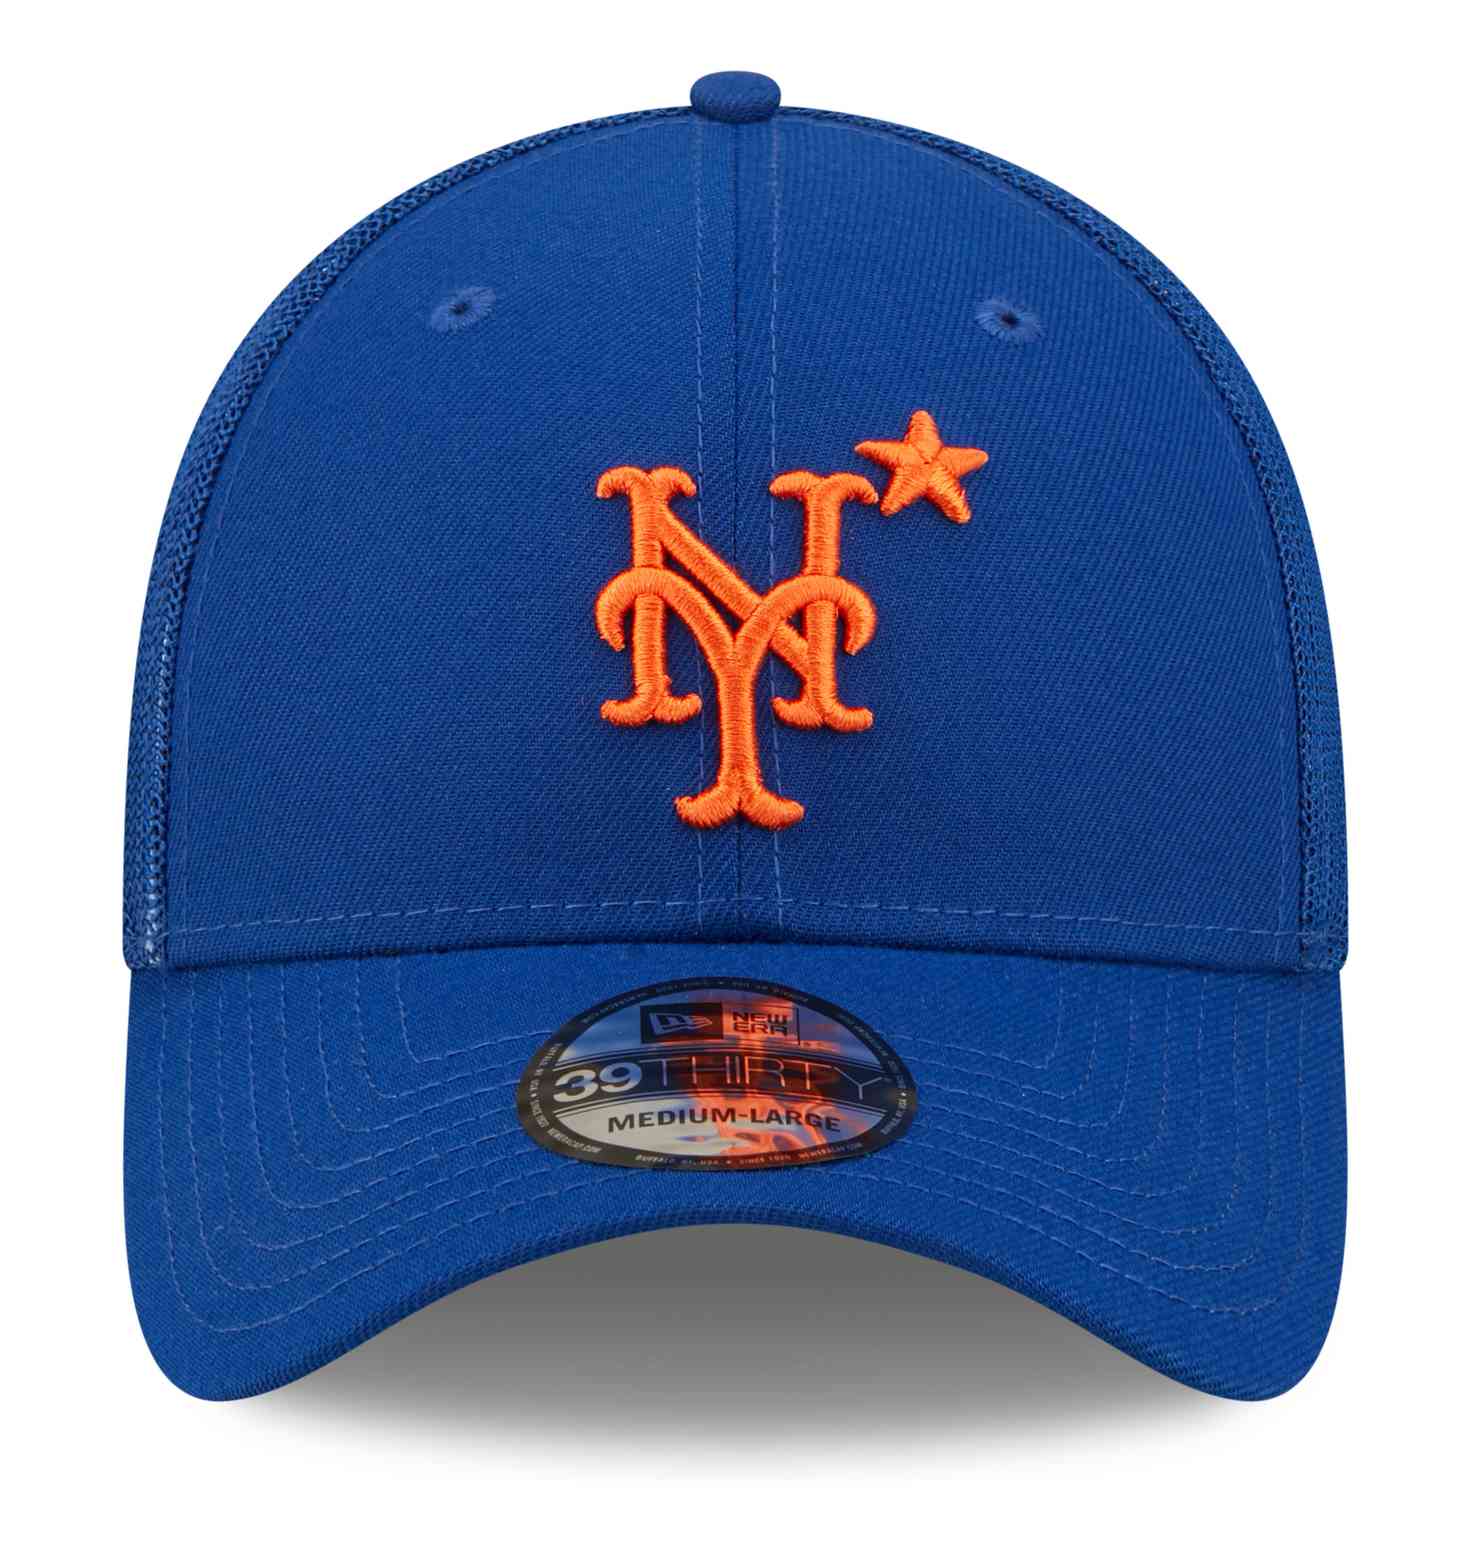 New Era - MLB New York Mets All Star Game Patch 39Thirty